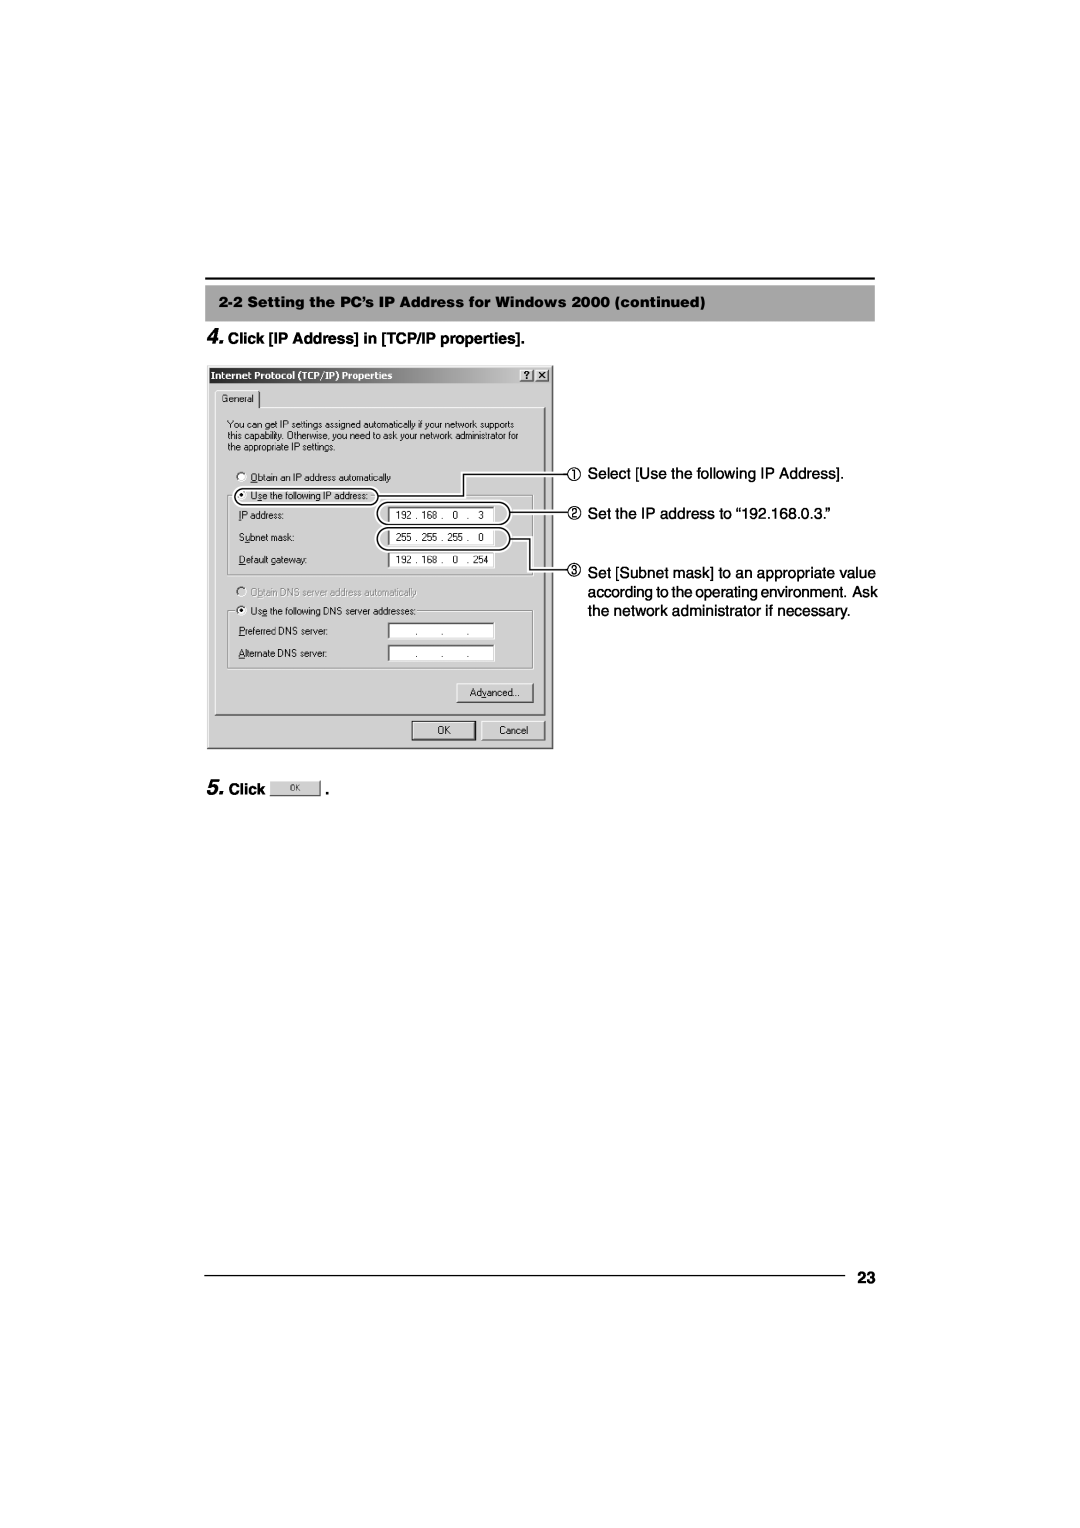 JVC VN-C10 manual Click IP Address in TCP/IP properties, Select Use the following IP Address 